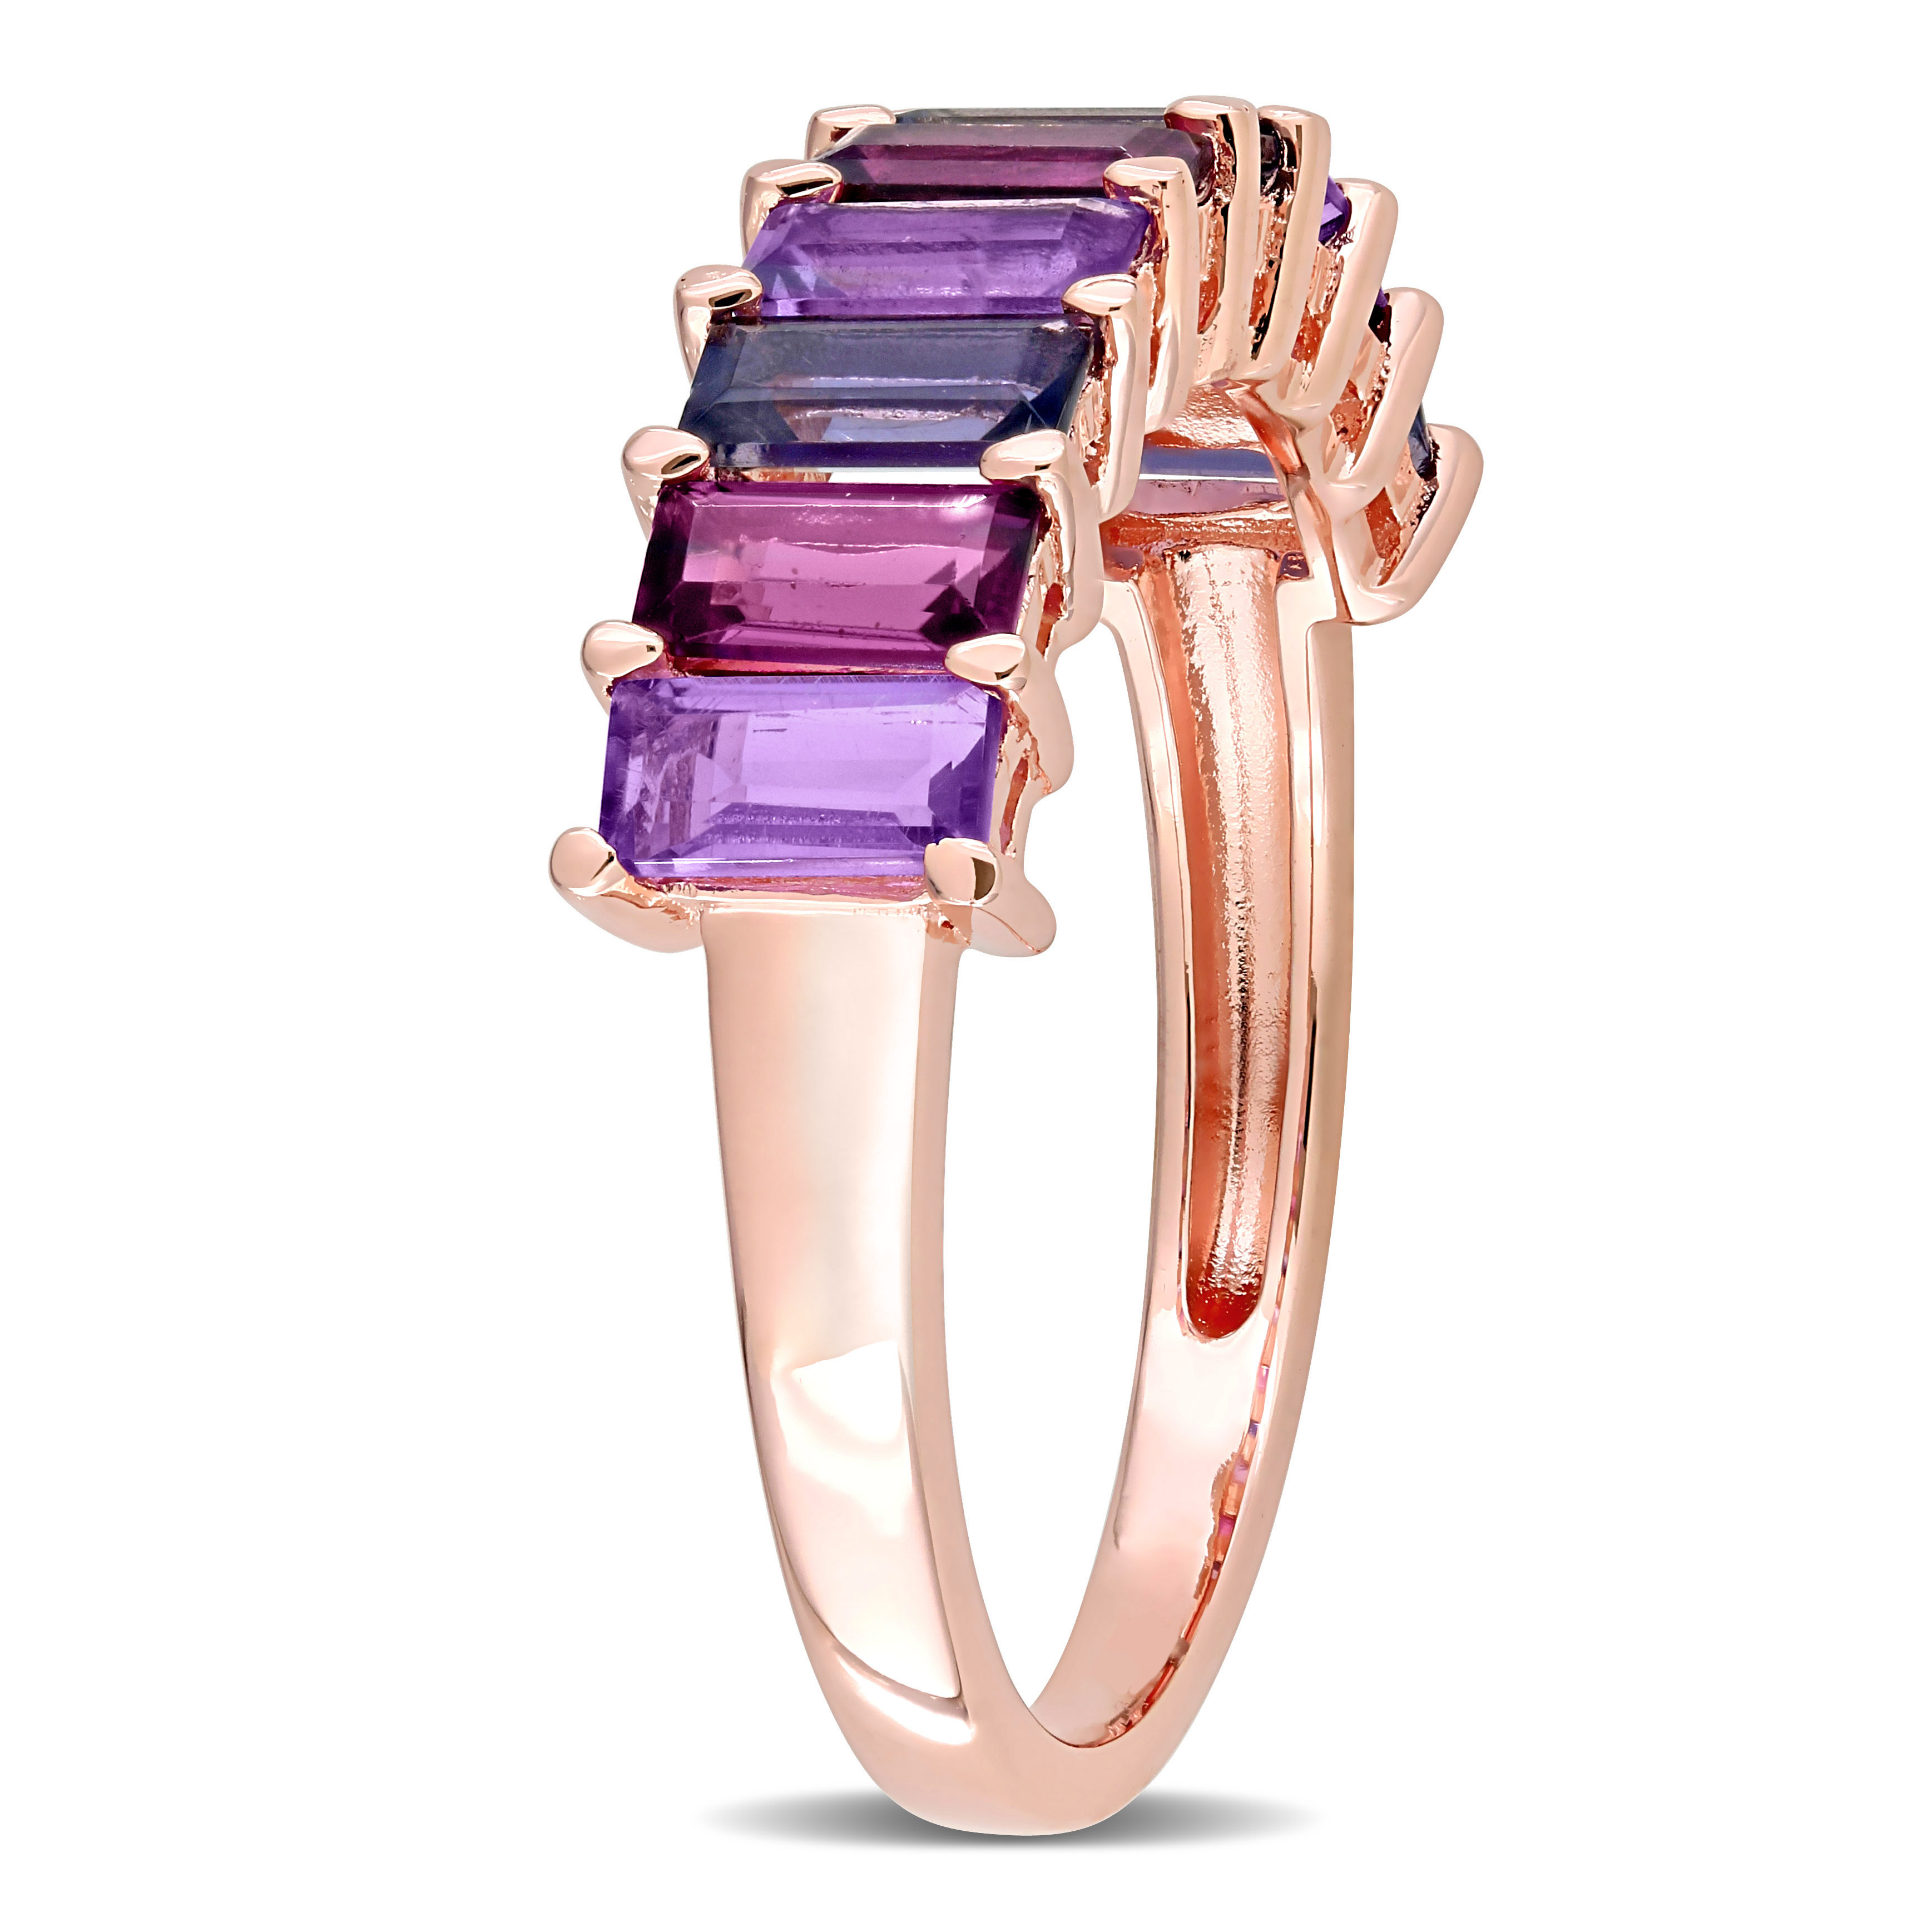 2 1/6 CT TGW Baguette Amethyst-Brazil Rhodolite and Iolite Semi-Eternity Ring in Rose Plated Sterling Silver